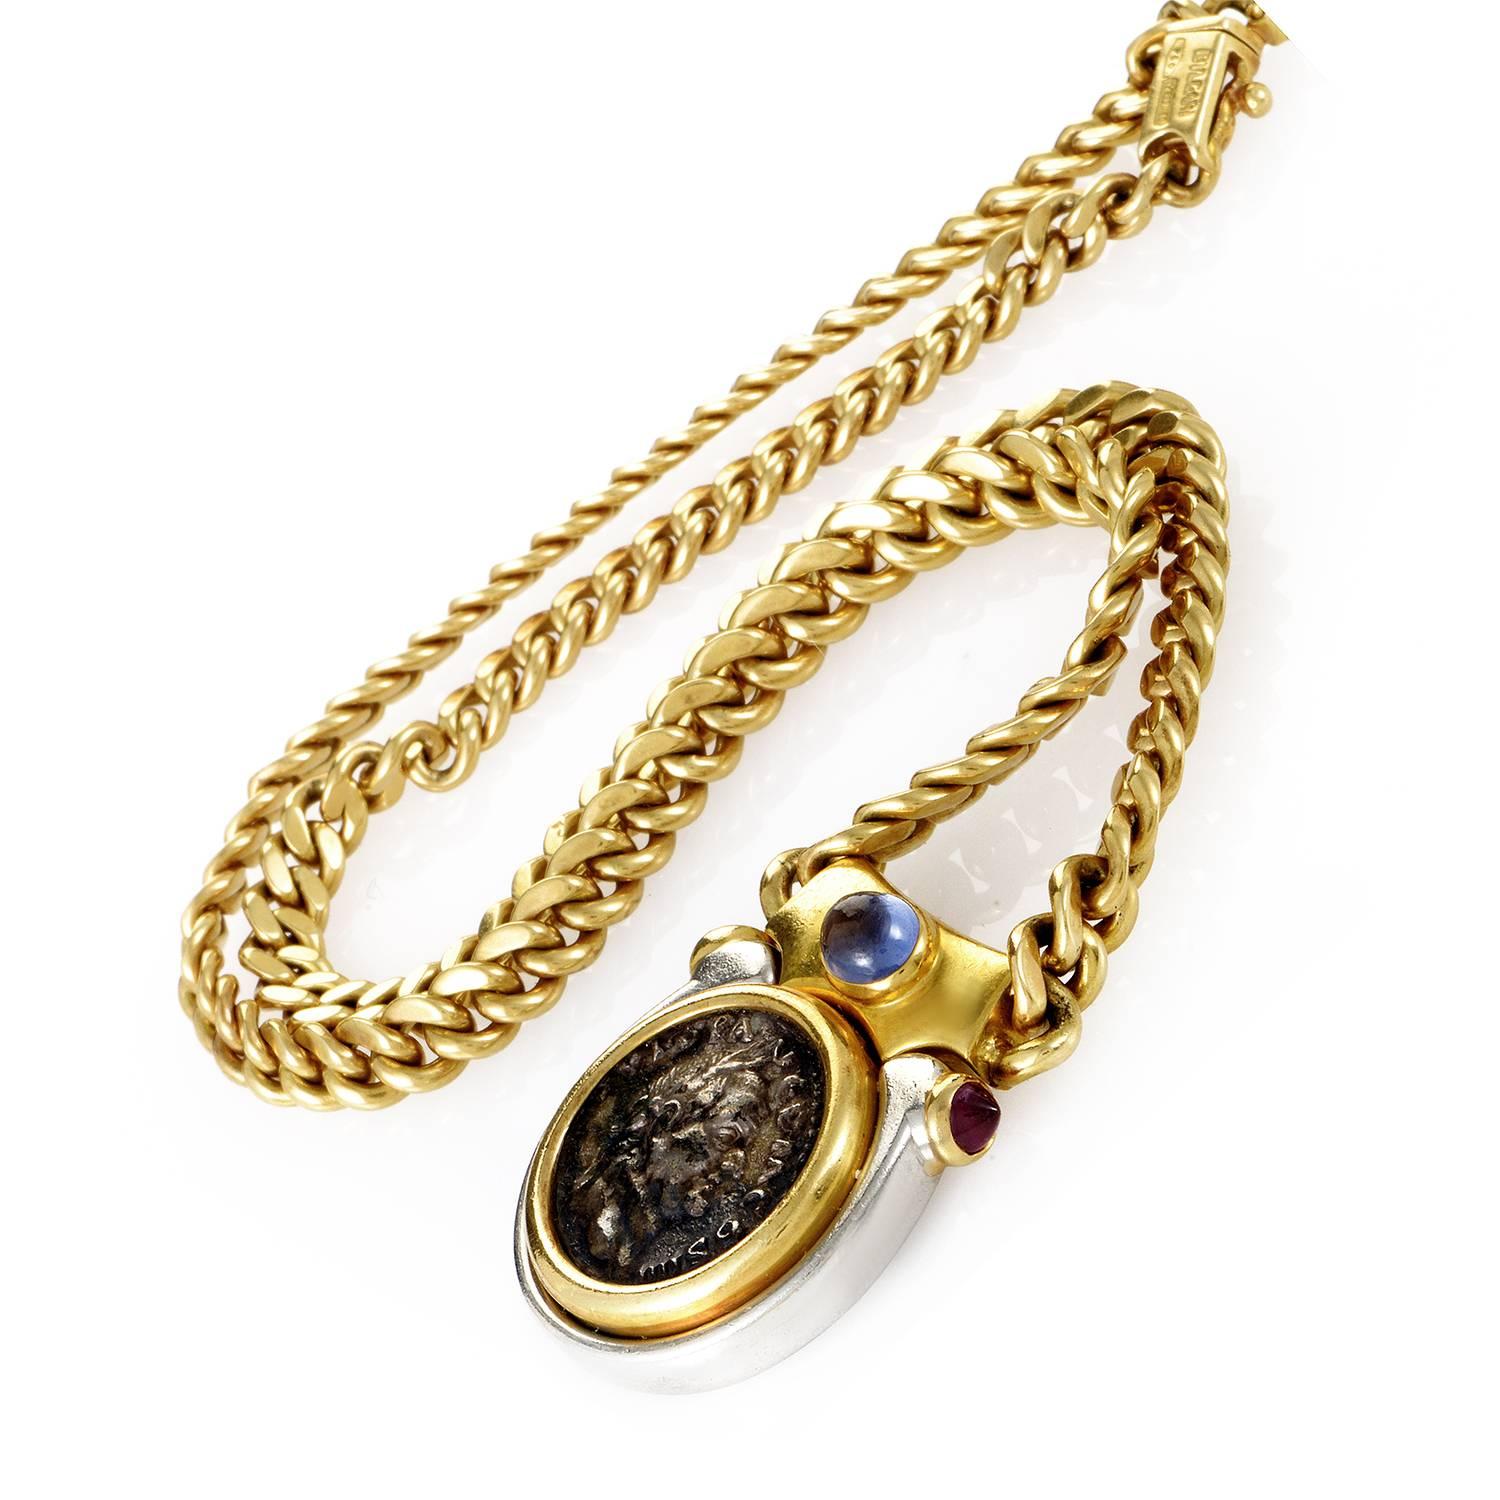 An ancient profile takes center stage in this magnificent production from Bulgari. At the wings of this pendant are two peaking rubies. At center is an engraved portrait on a coin, its features complimented by the sapphire floating overhead. The